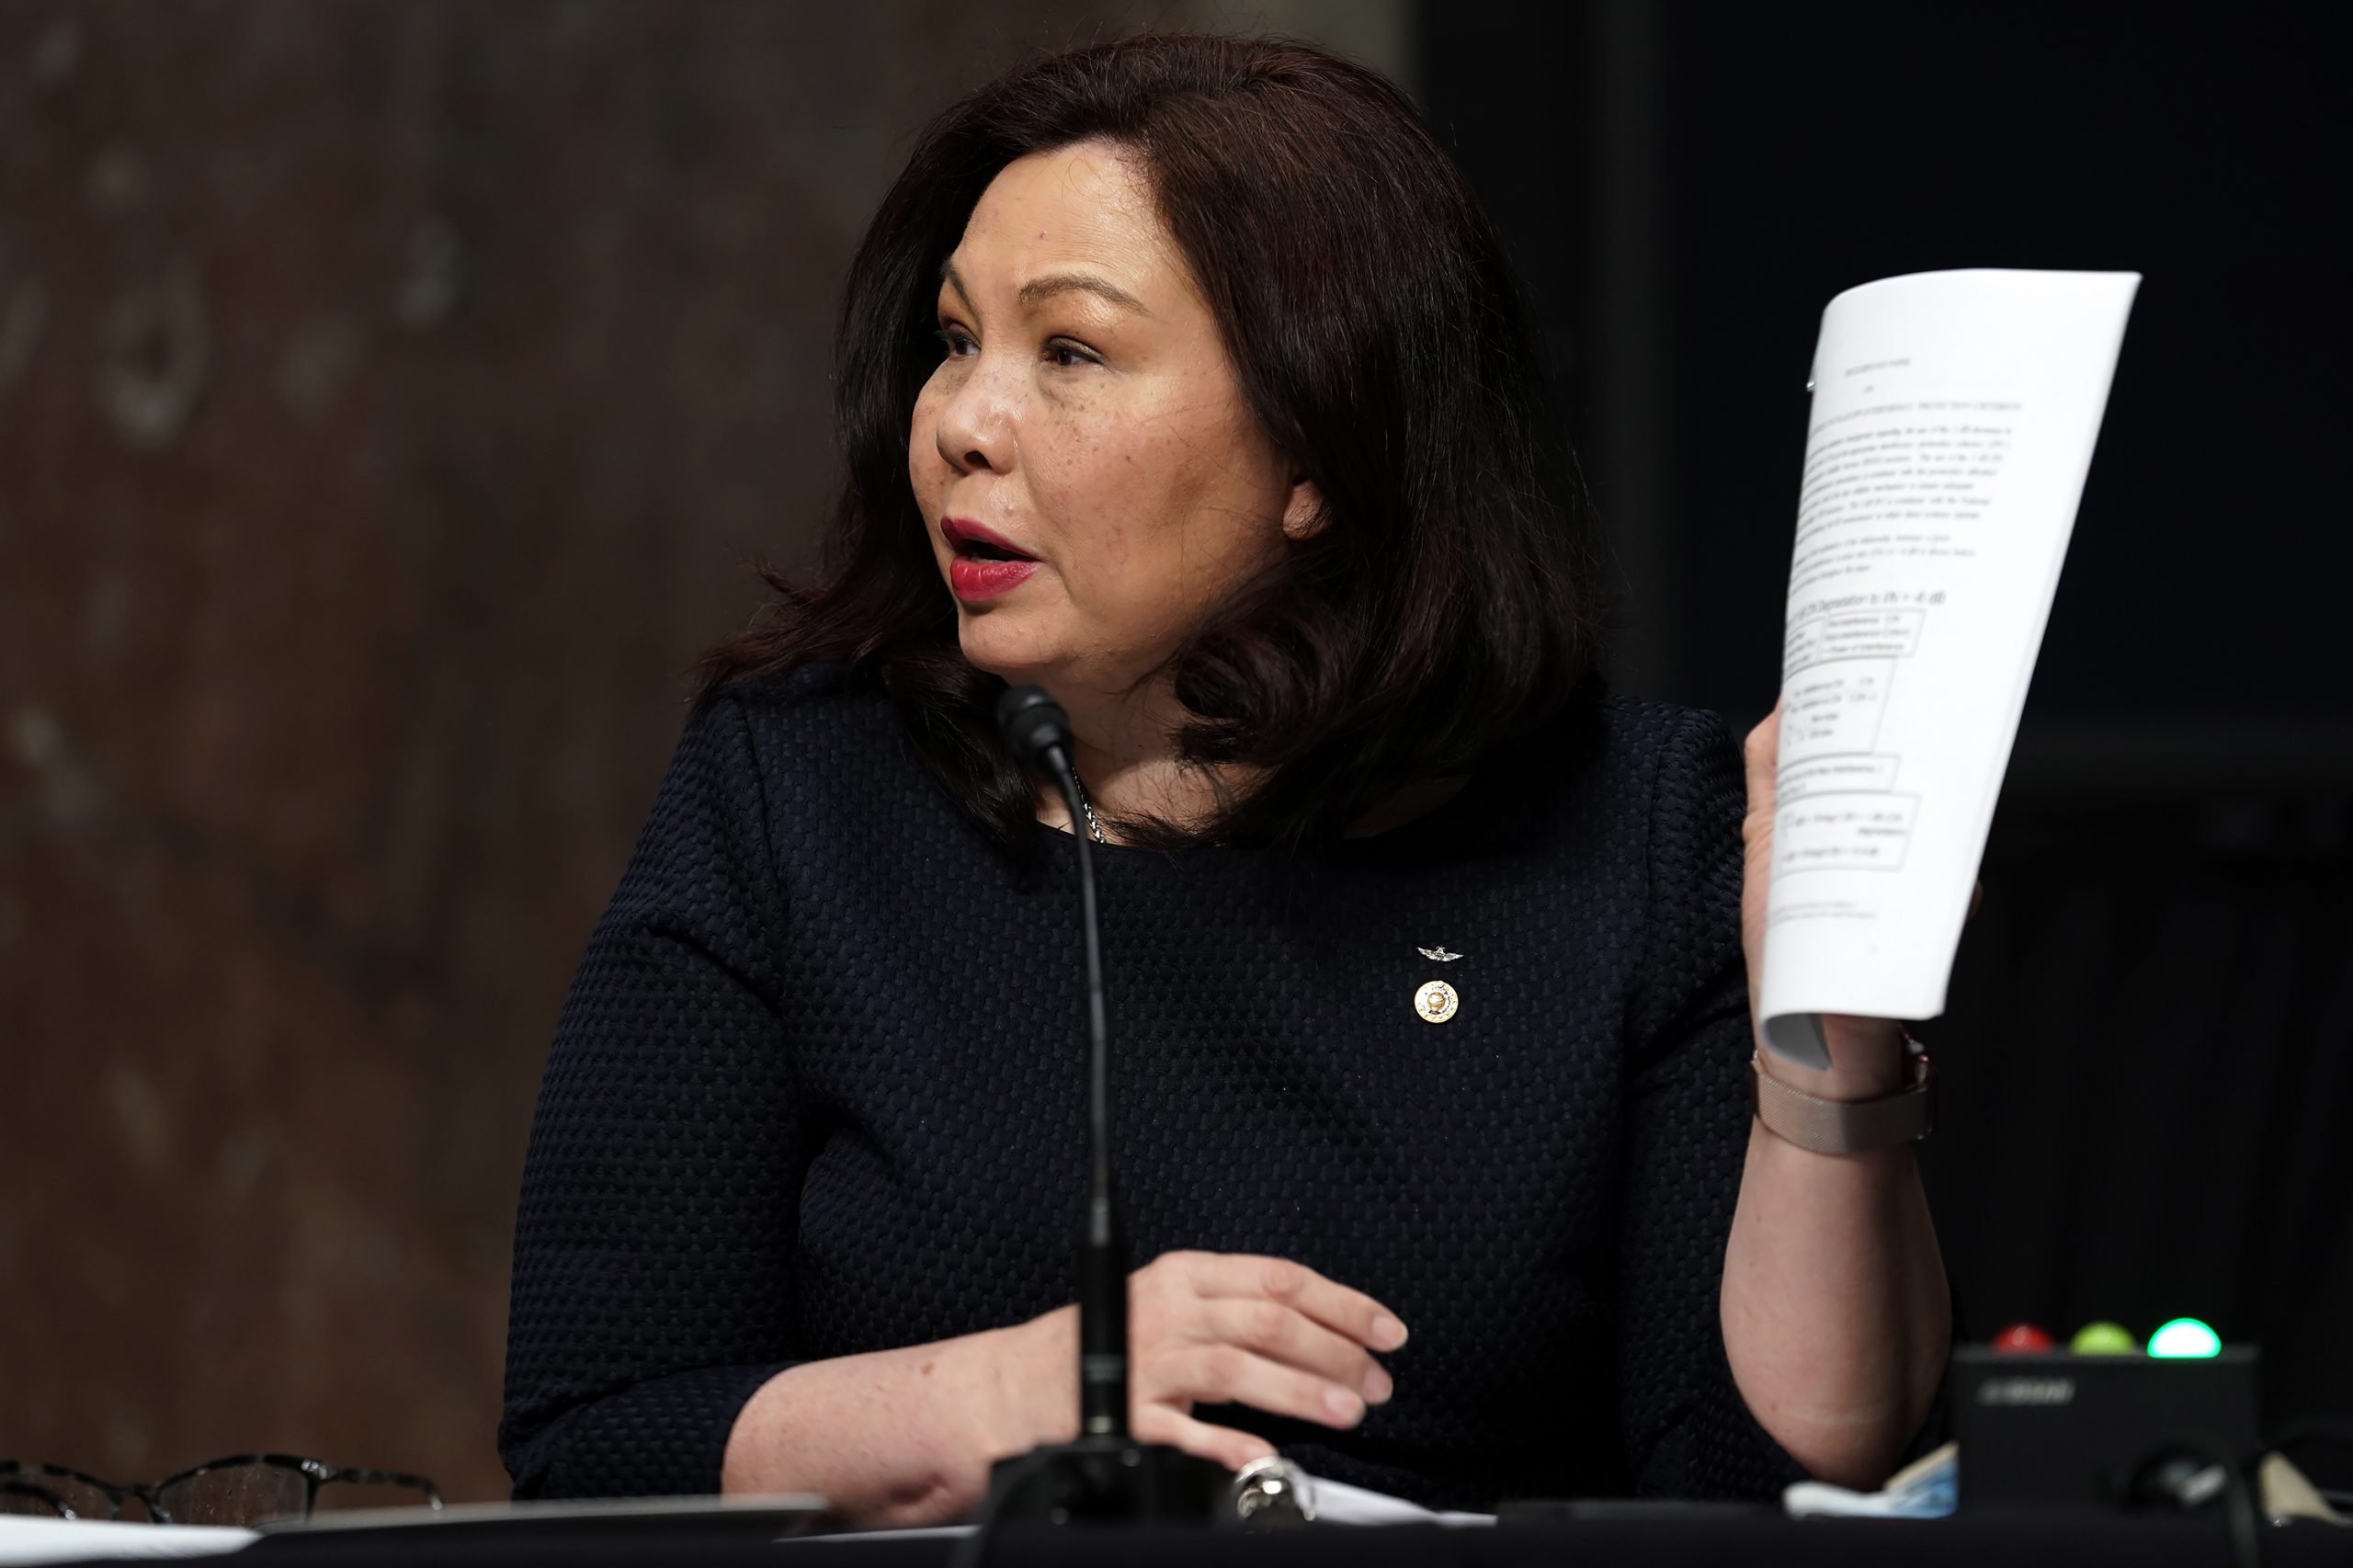 WASHINGTON, DC - MAY 06: Sen. Tammy Duckworth (D-IL) is seen during a Senate Armed Services Committee hearing to discuss the national security impact of the Federal Communications Commissions L-band spectrum approval to Ligado Networks on Capitol Hill on May 6, 2020 in Washington, DC. (Photo by Greg Nash - Pool/Getty Images)